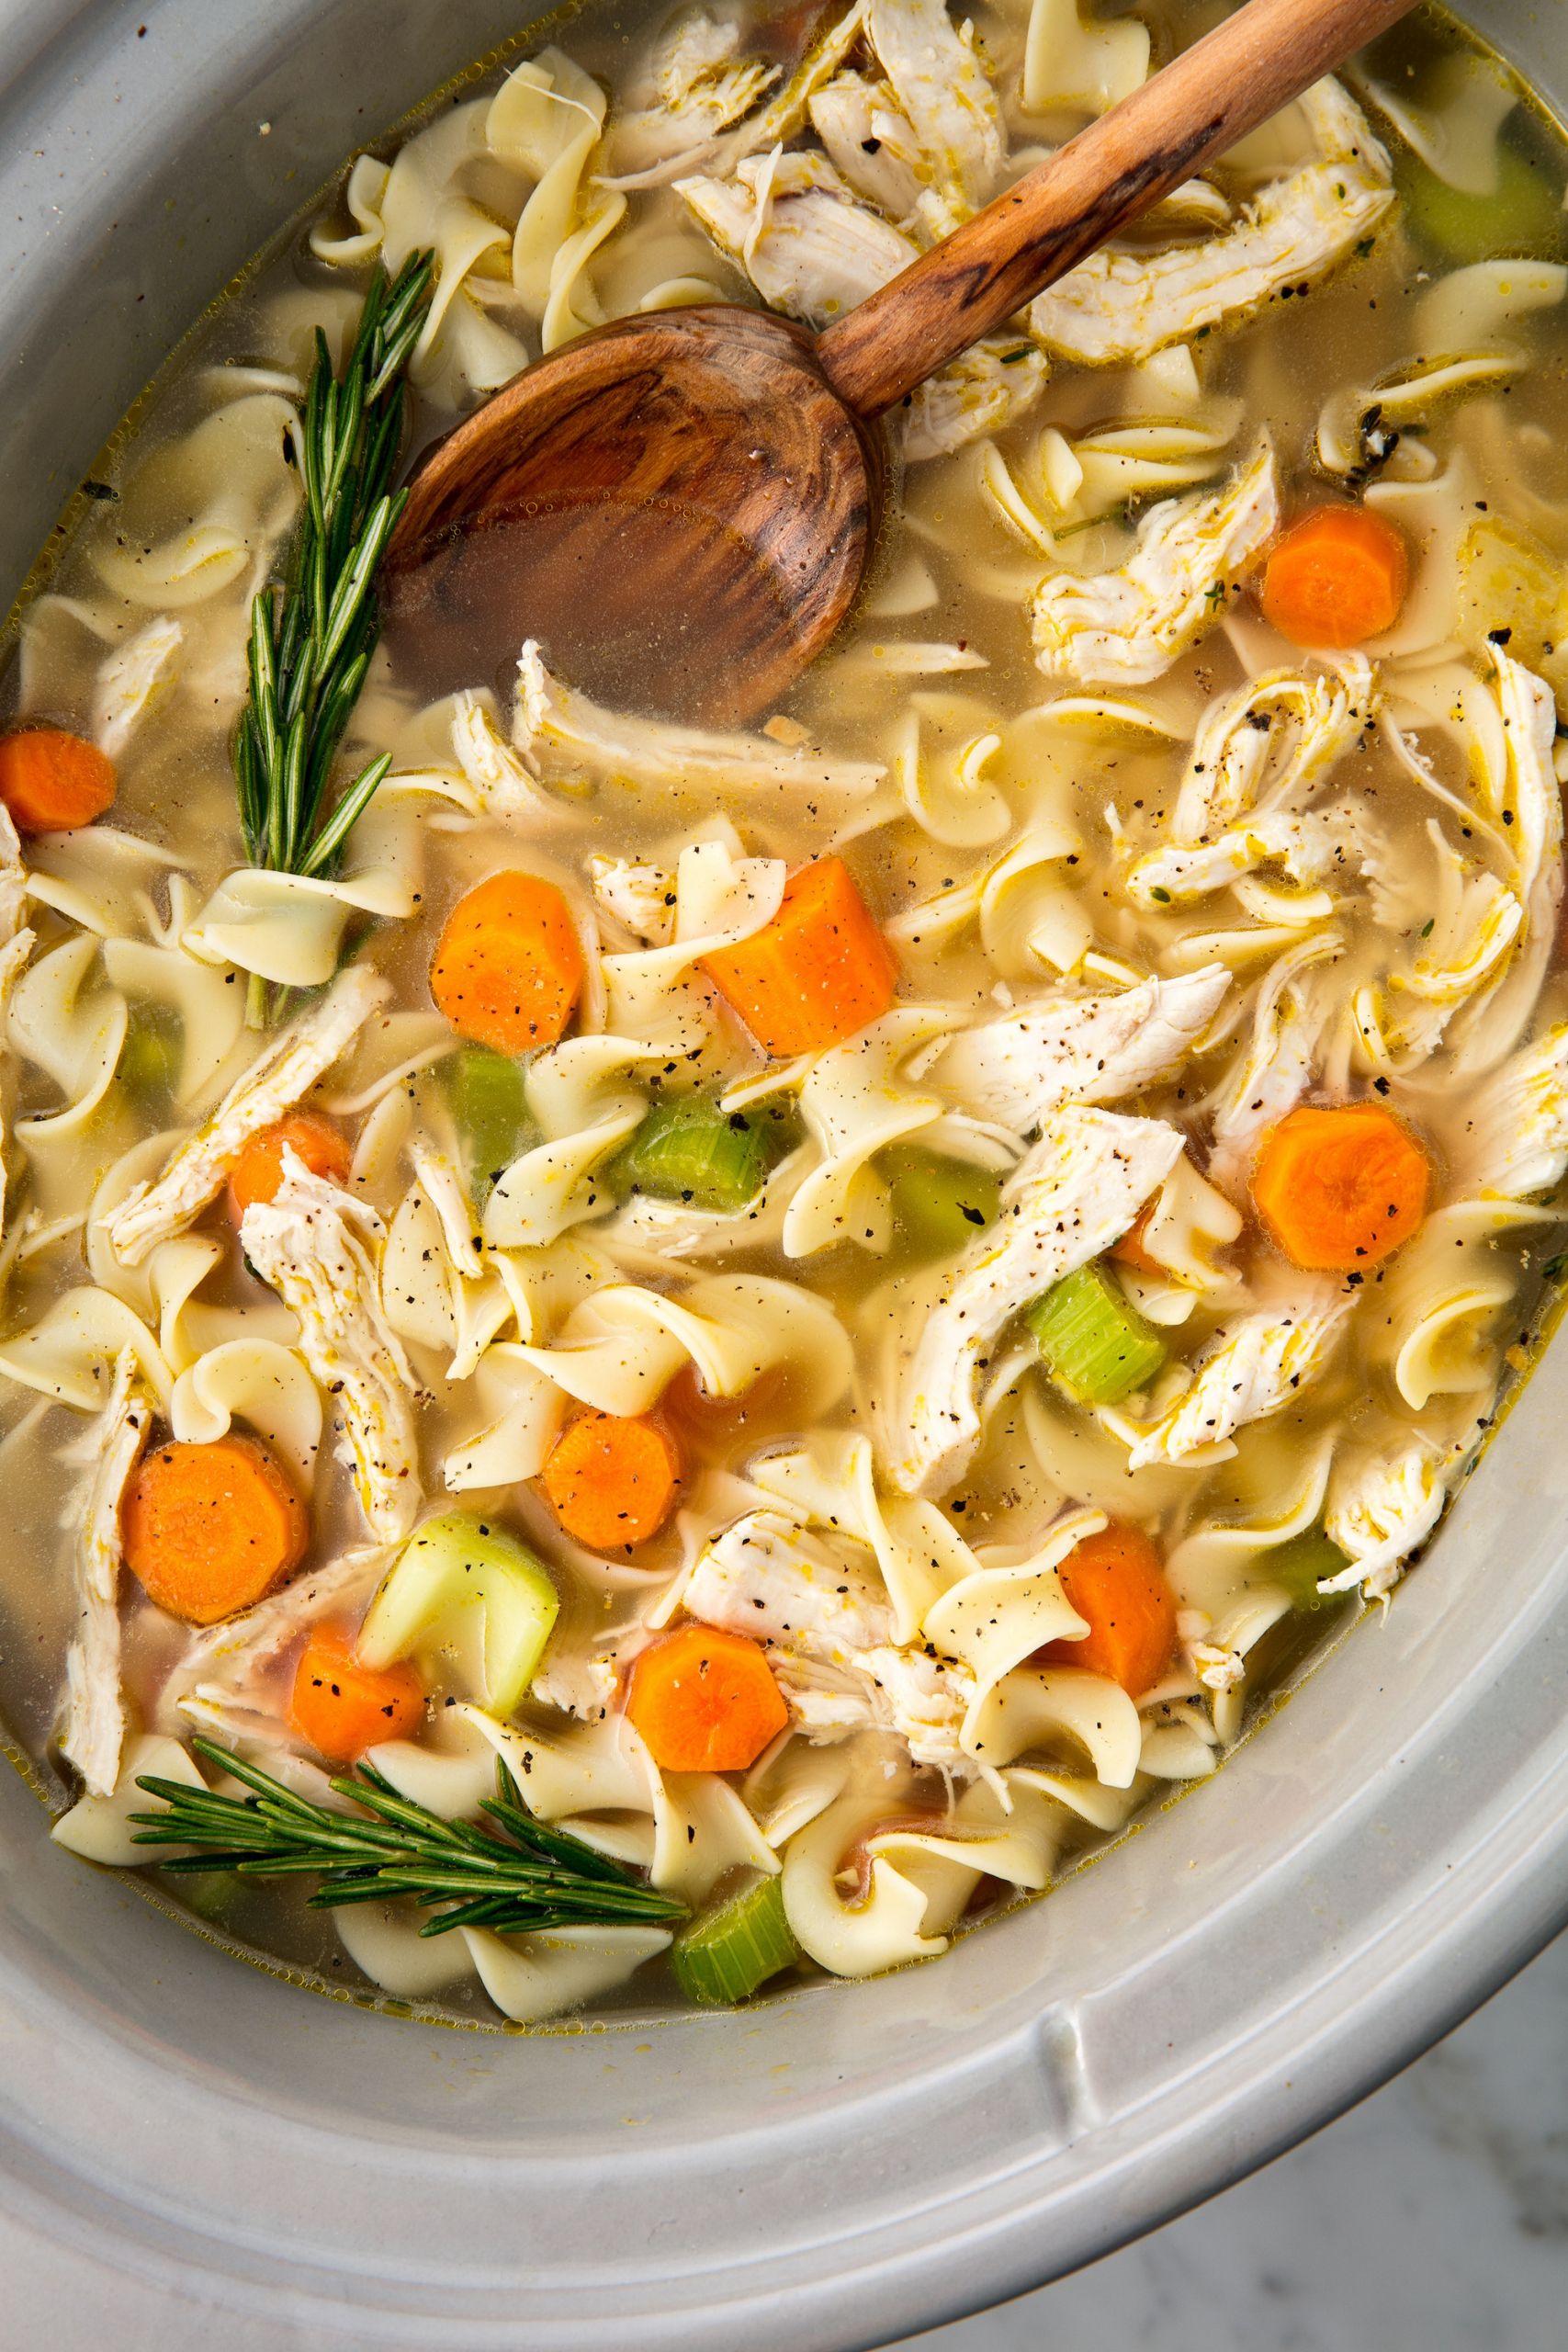 Chicken Noodle Soup Recipe Easy
 50 Noodle Soup Recipes – Best Homemade Soups with Noodles